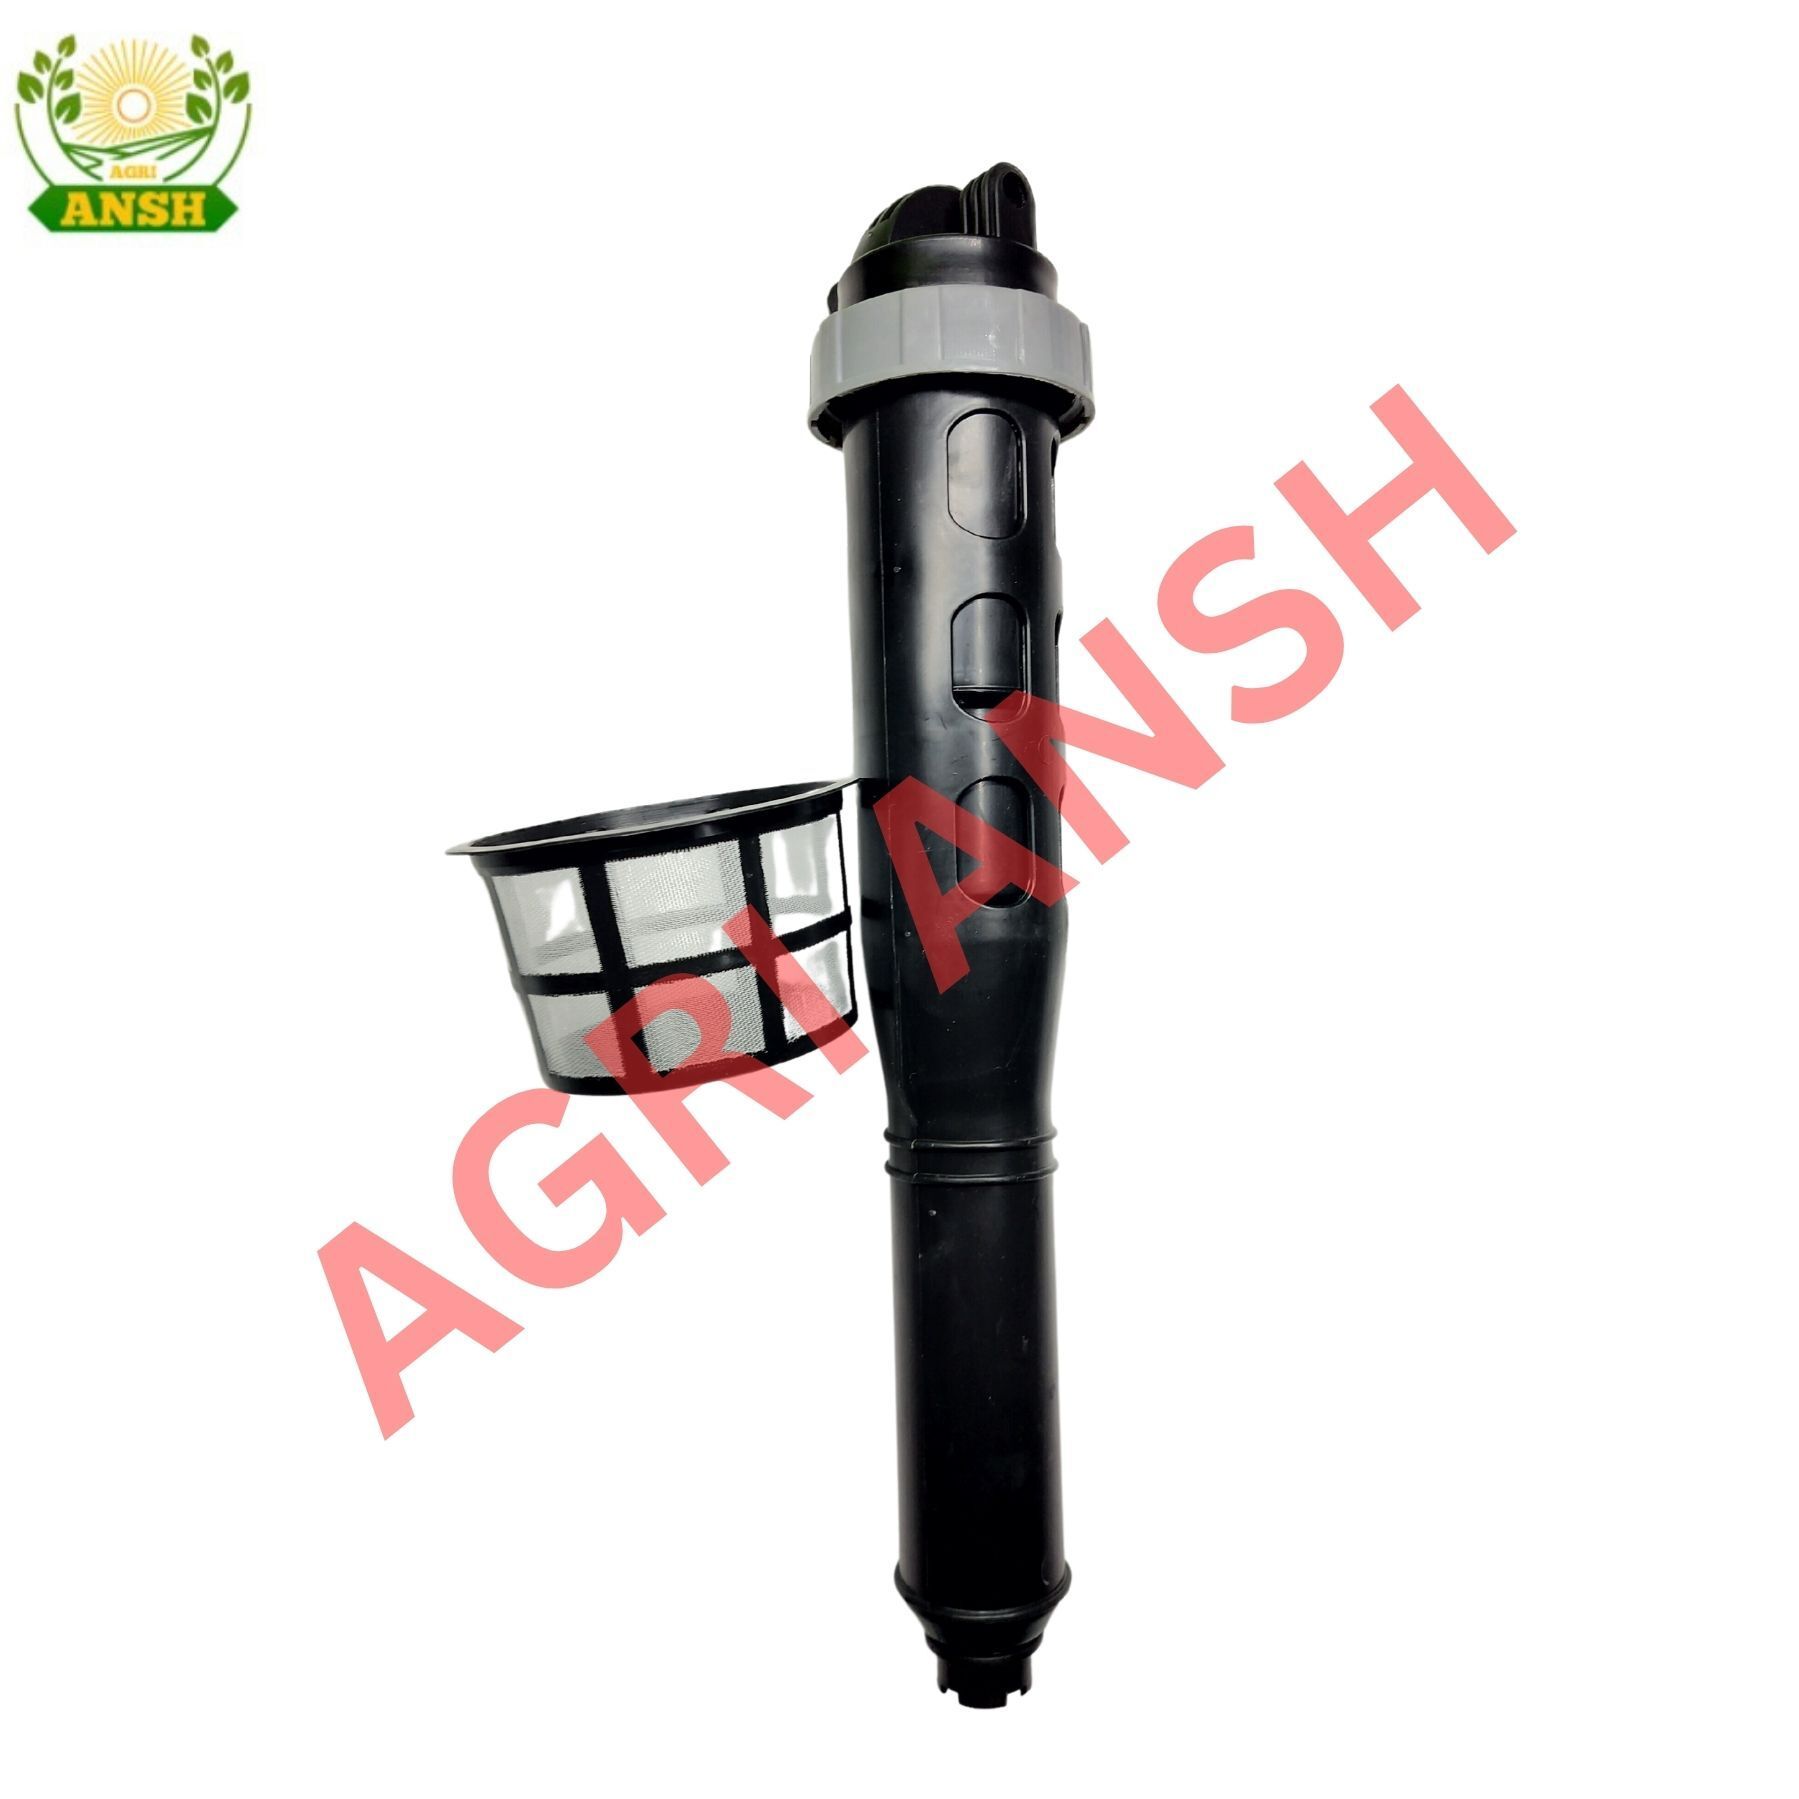 DOUBLE MOTOR Agricultural Battery Sprayer Pump